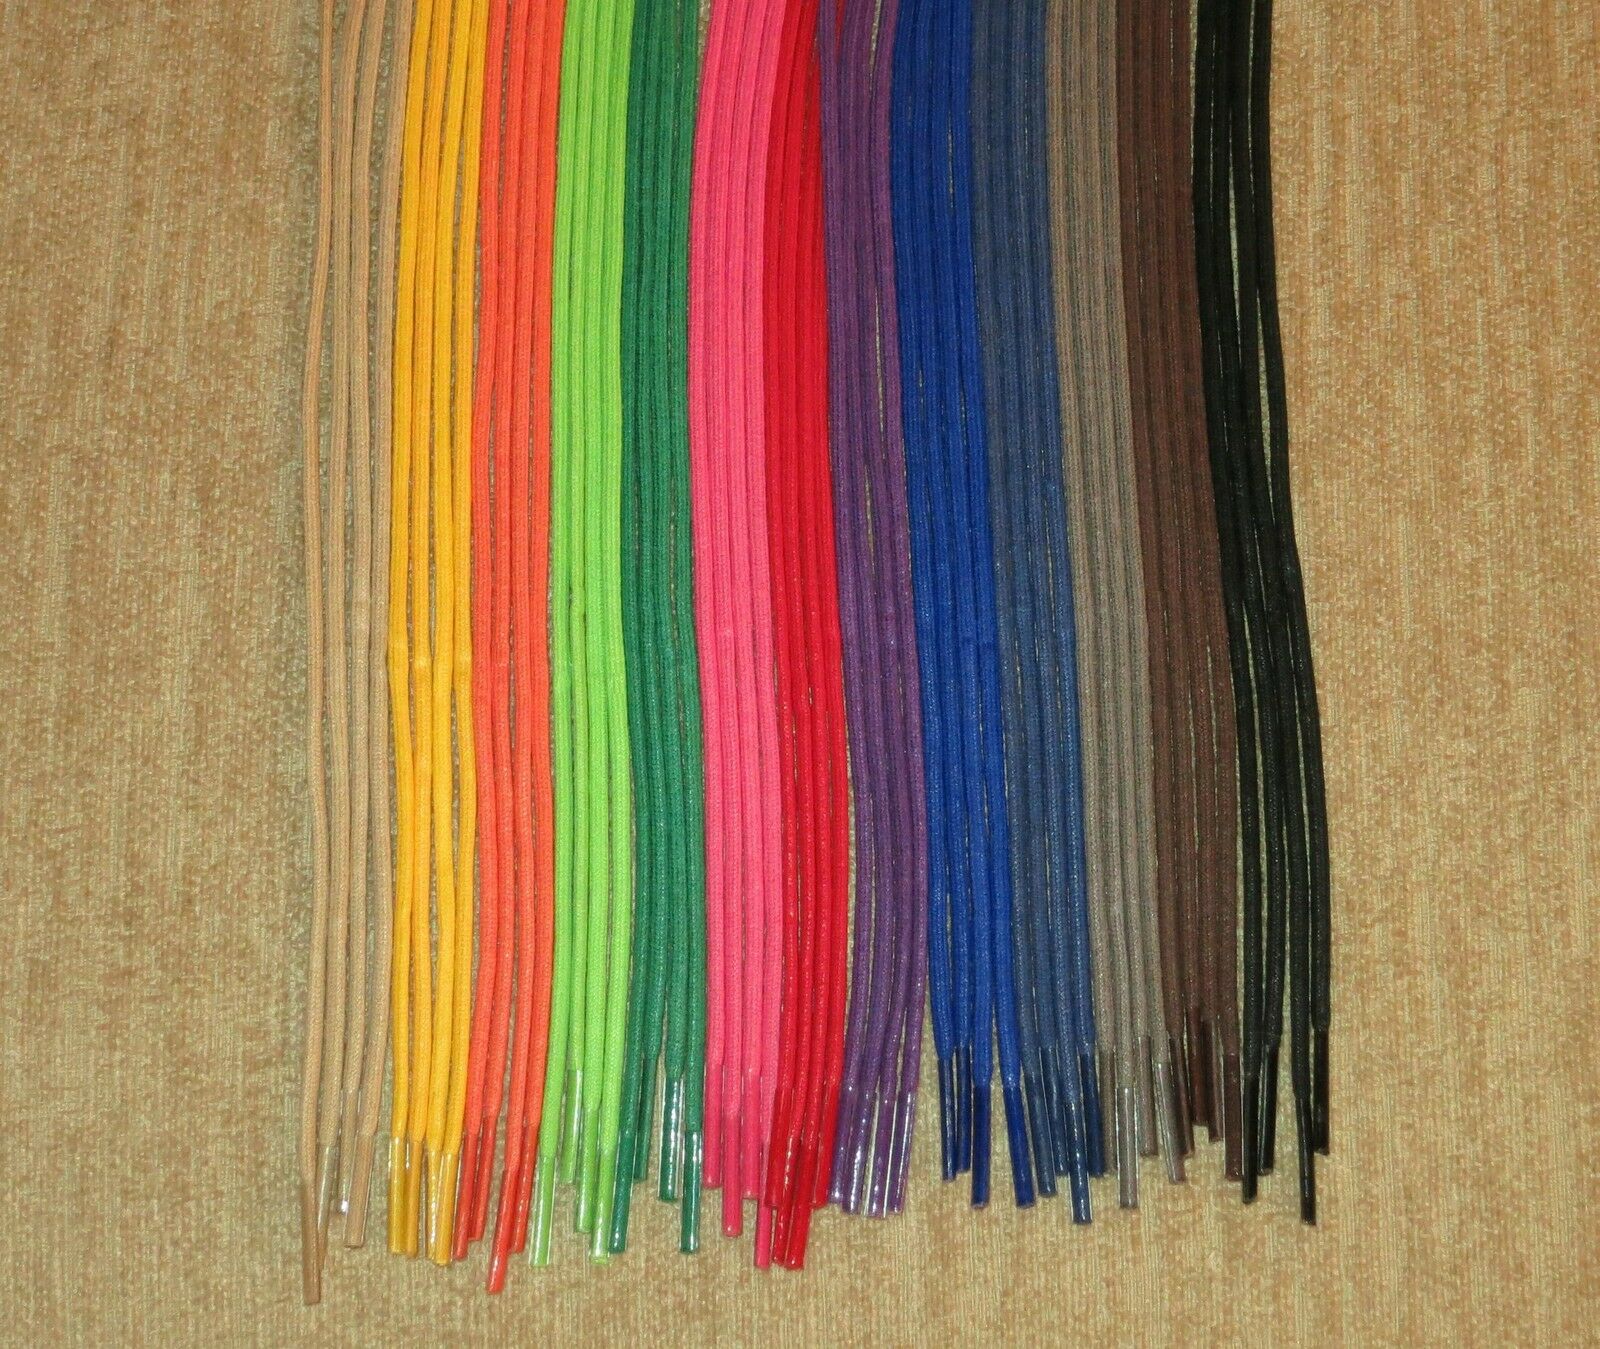 Waxed Cotton Dress Shoe Round Shoelaces! 24 30 36 Inch Colored Shoe Lace Strings